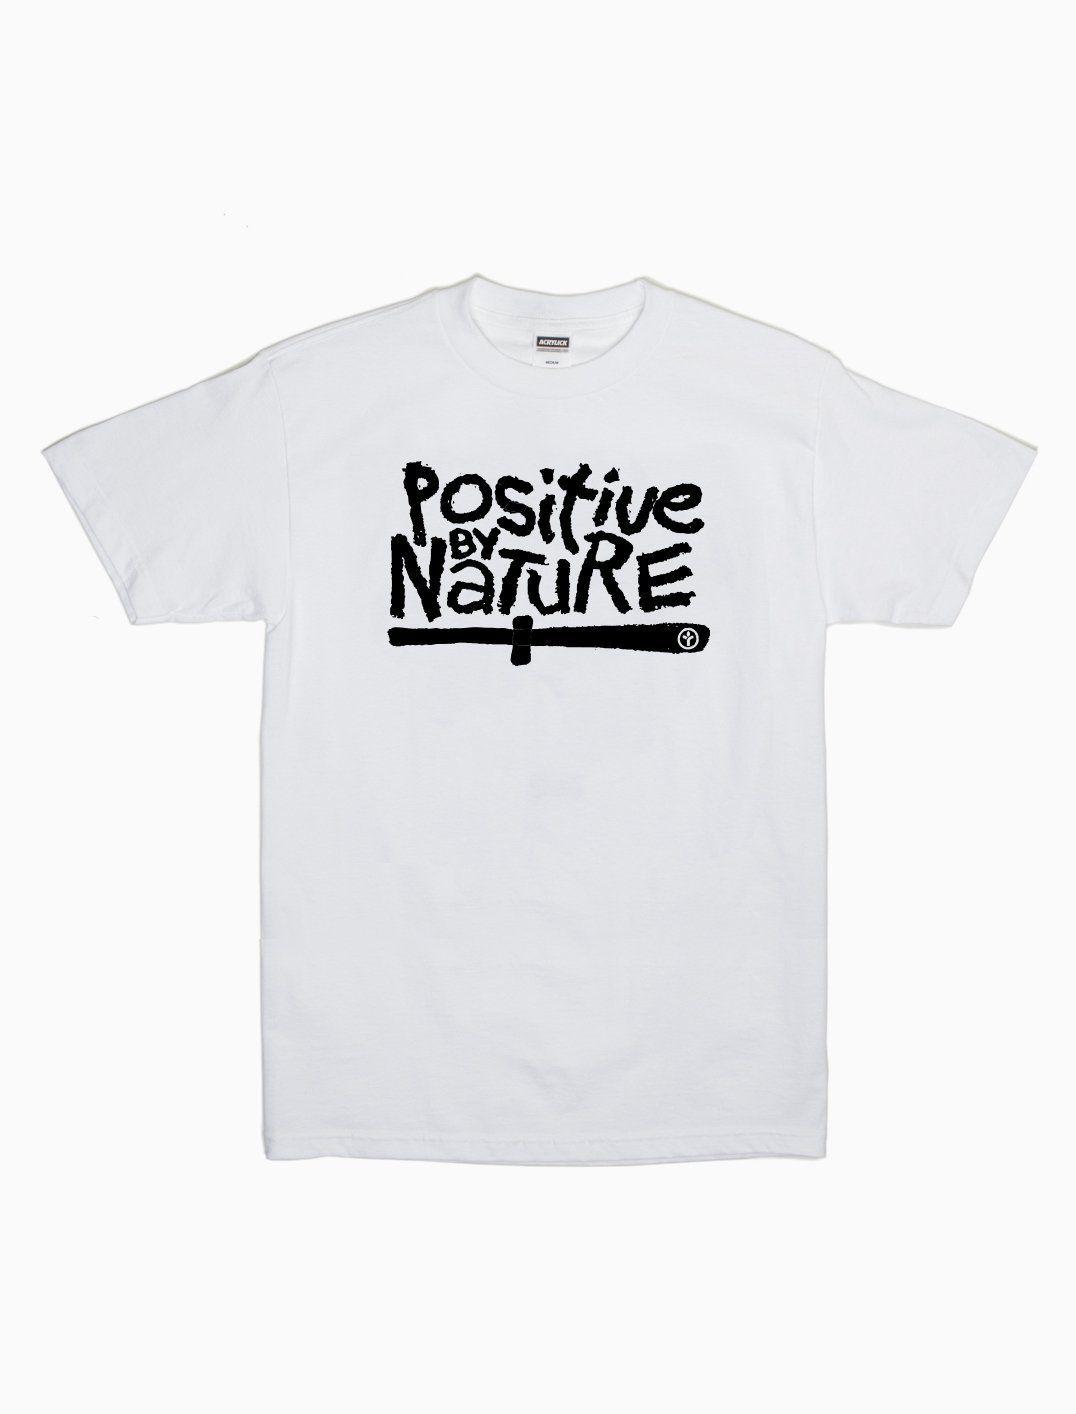 Acrylick Clothing Logo - Positive By Nature Tee | ACRYLICK®